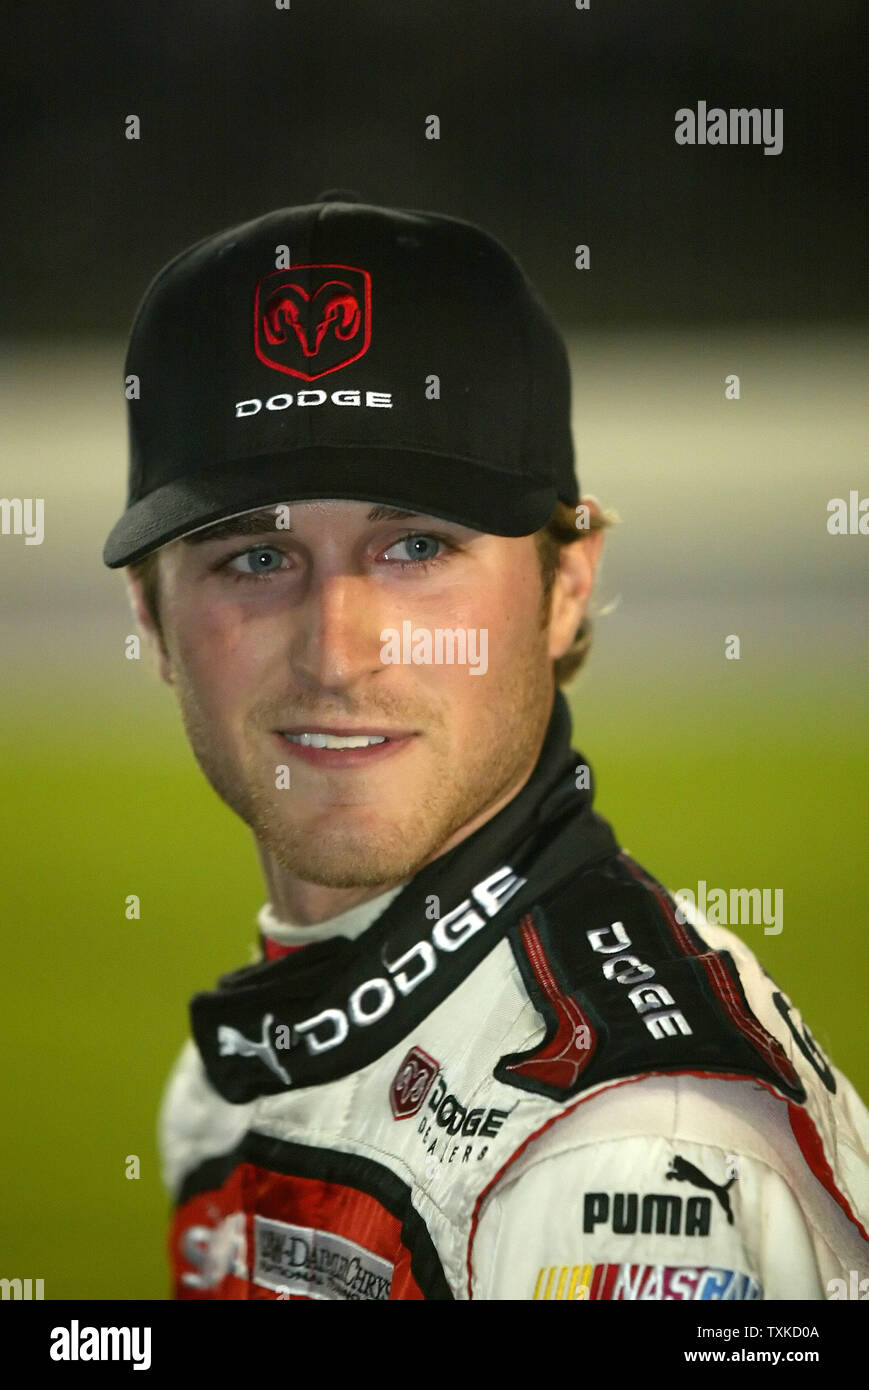 NASCAR driver Kasey Kahne walks on pit road before the start of qualifying for the Bank of America 500 NASCAR Nextel Cup race at the Lowe's Motor Speedway near Charlotte, N.C., on October 12, 2006. (UPI Photo/Nell Redmond) Stock Photo